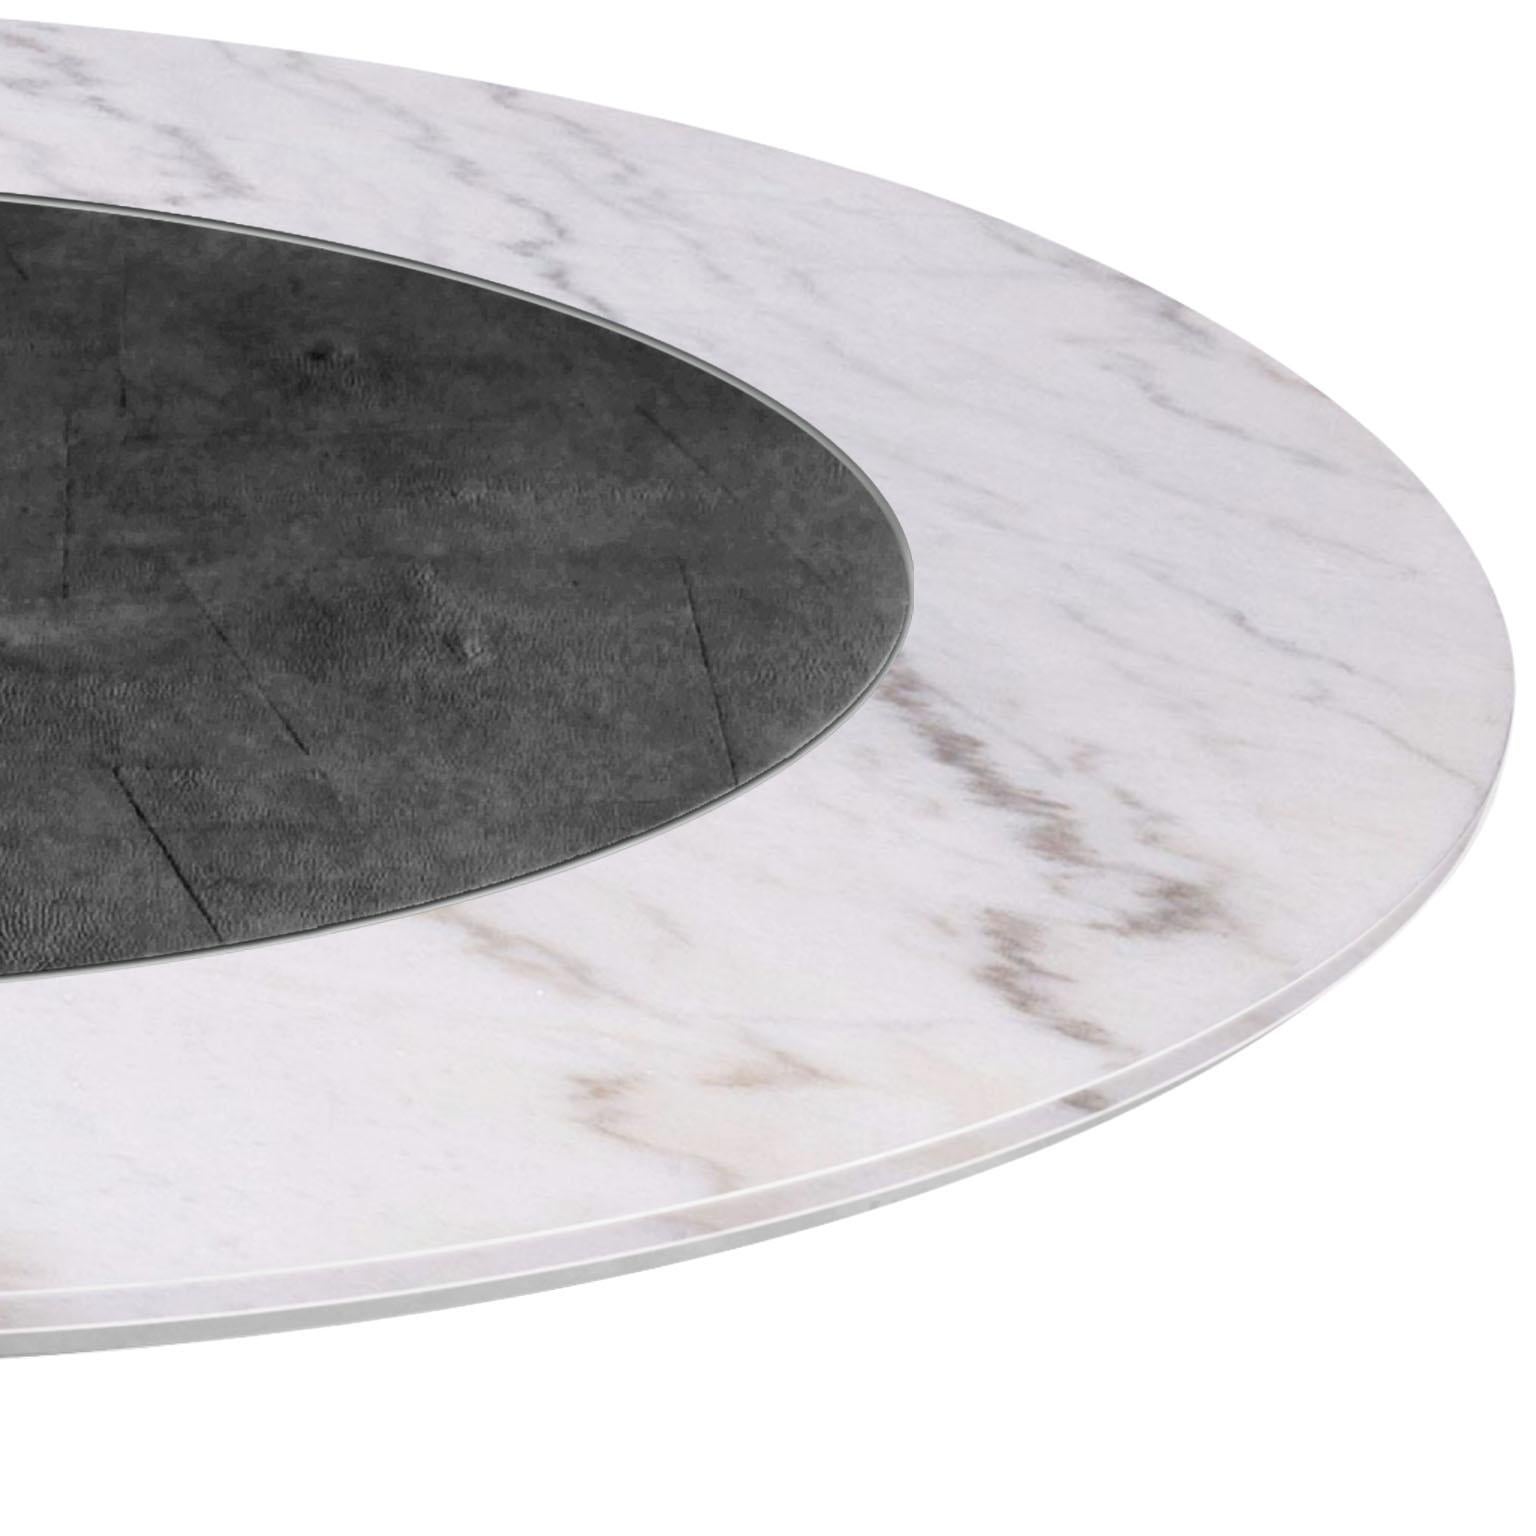 Hand-Crafted Modern Round Dining Table White Marble Black Scagliola Shagreen Decoration Brass